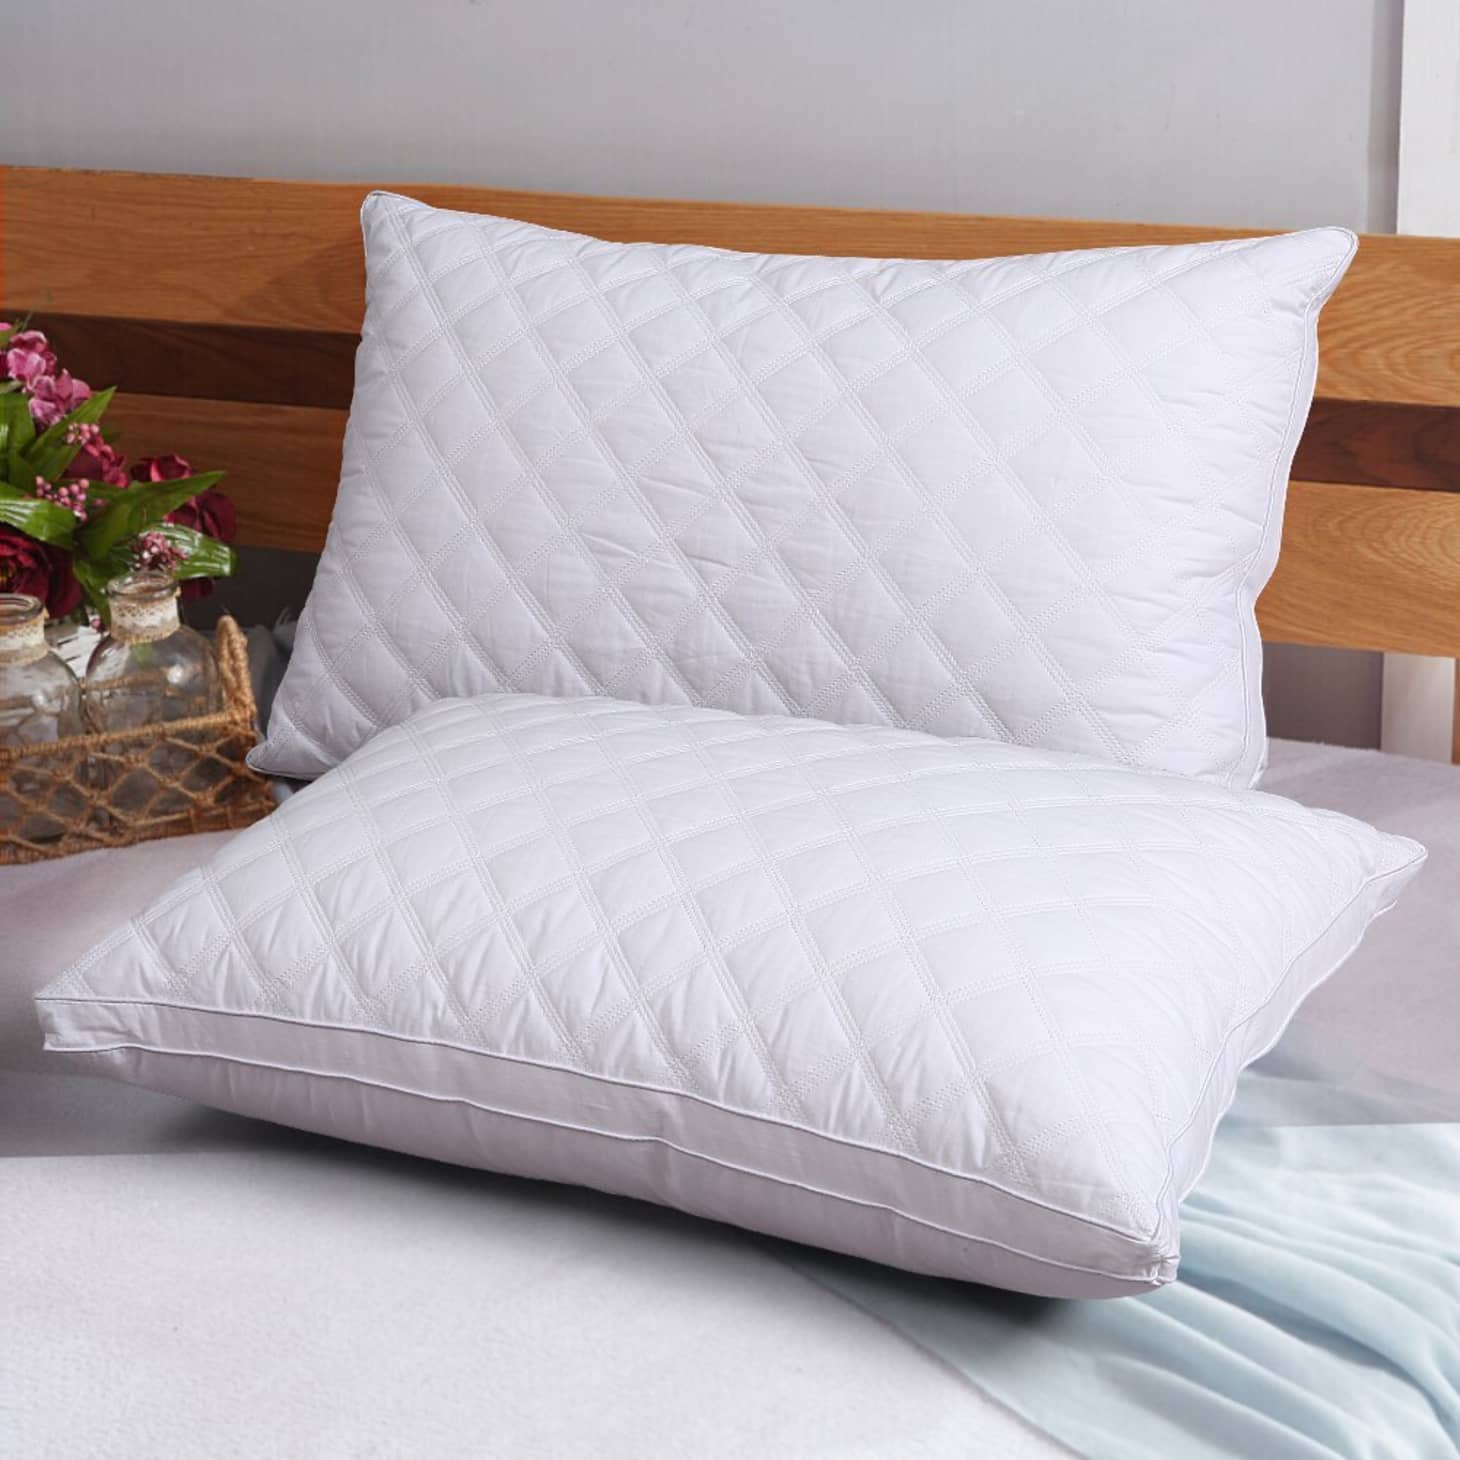 5 Top-Rated Bed Pillows On Sale at Amazon  Apartment Therapy